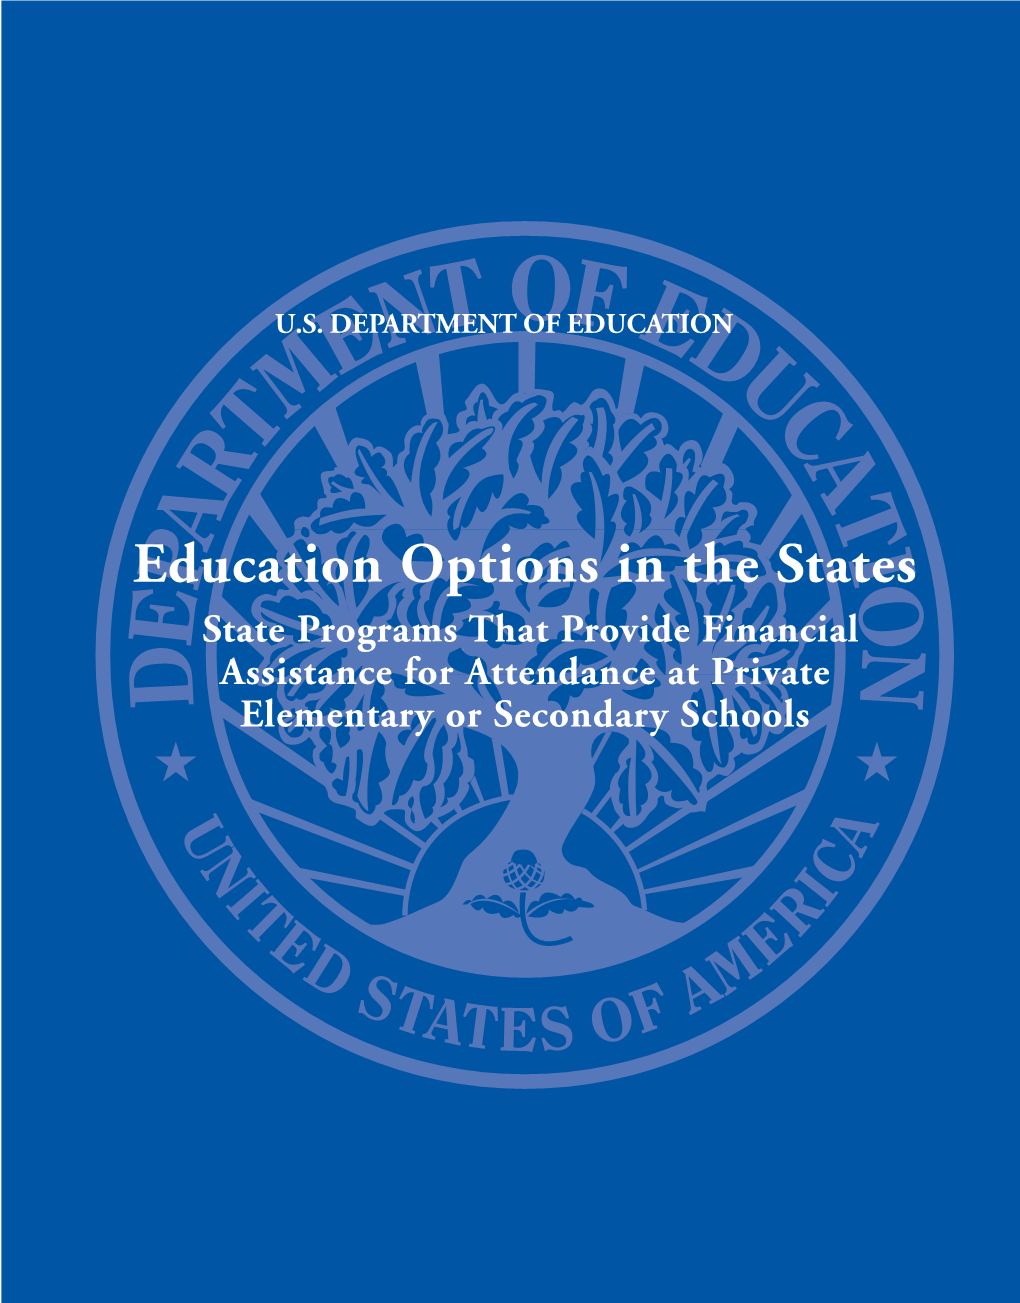 Education Options in the States State Programs That Provide Financial Assistance for Attendance at Private Elementary Or Secondary Schools